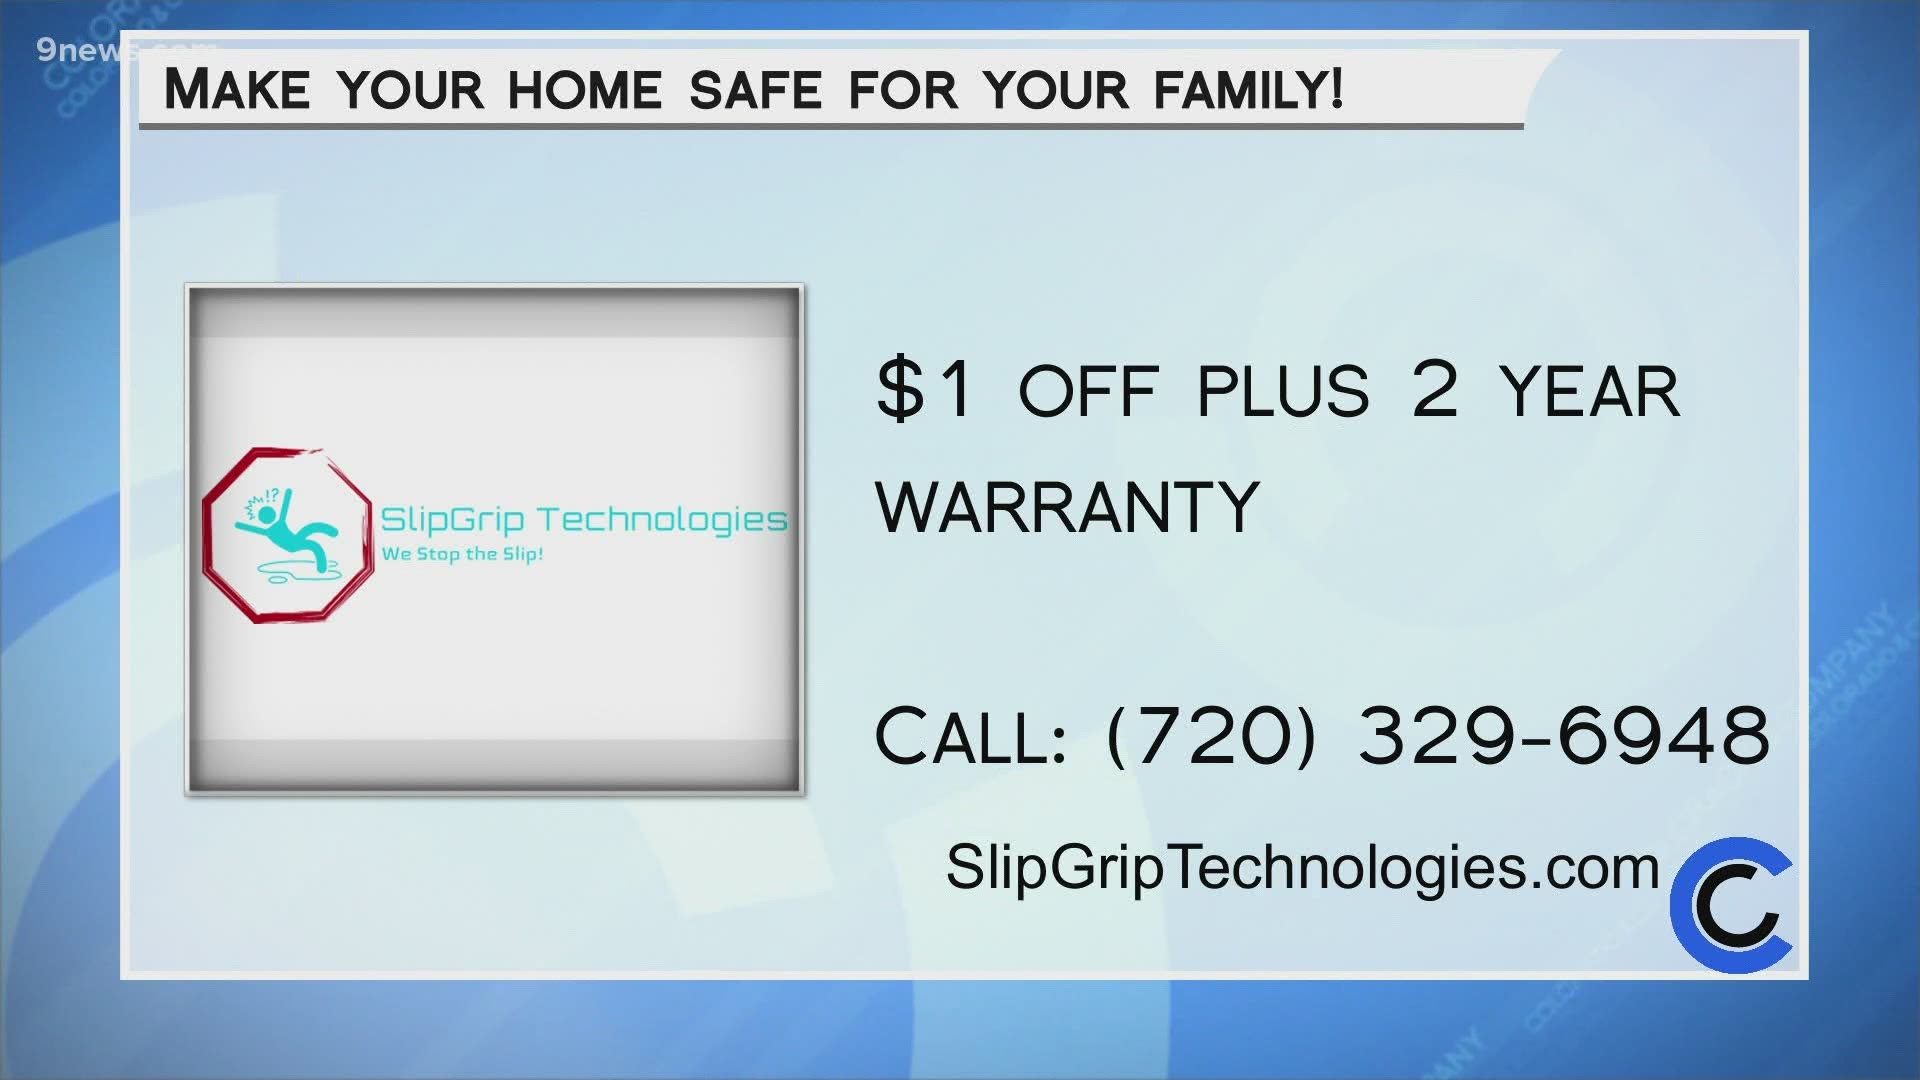 SlipGrip is offering a dollar off per square foot, with a 2-year warranty! Give them a call at 720.329.6948 or visit SlipGripTechnologies.com to learn more.